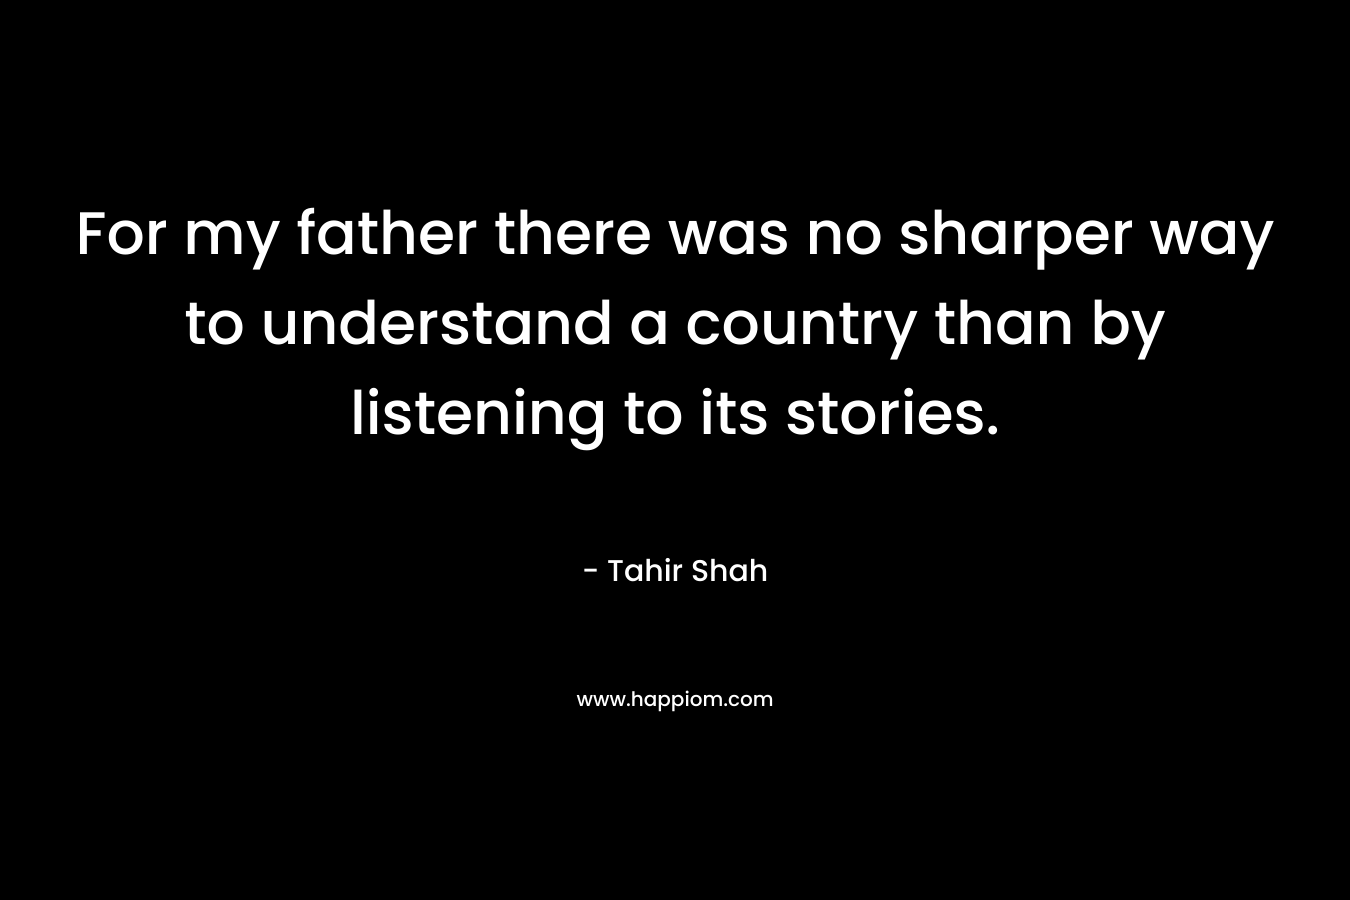 For my father there was no sharper way to understand a country than by listening to its stories.